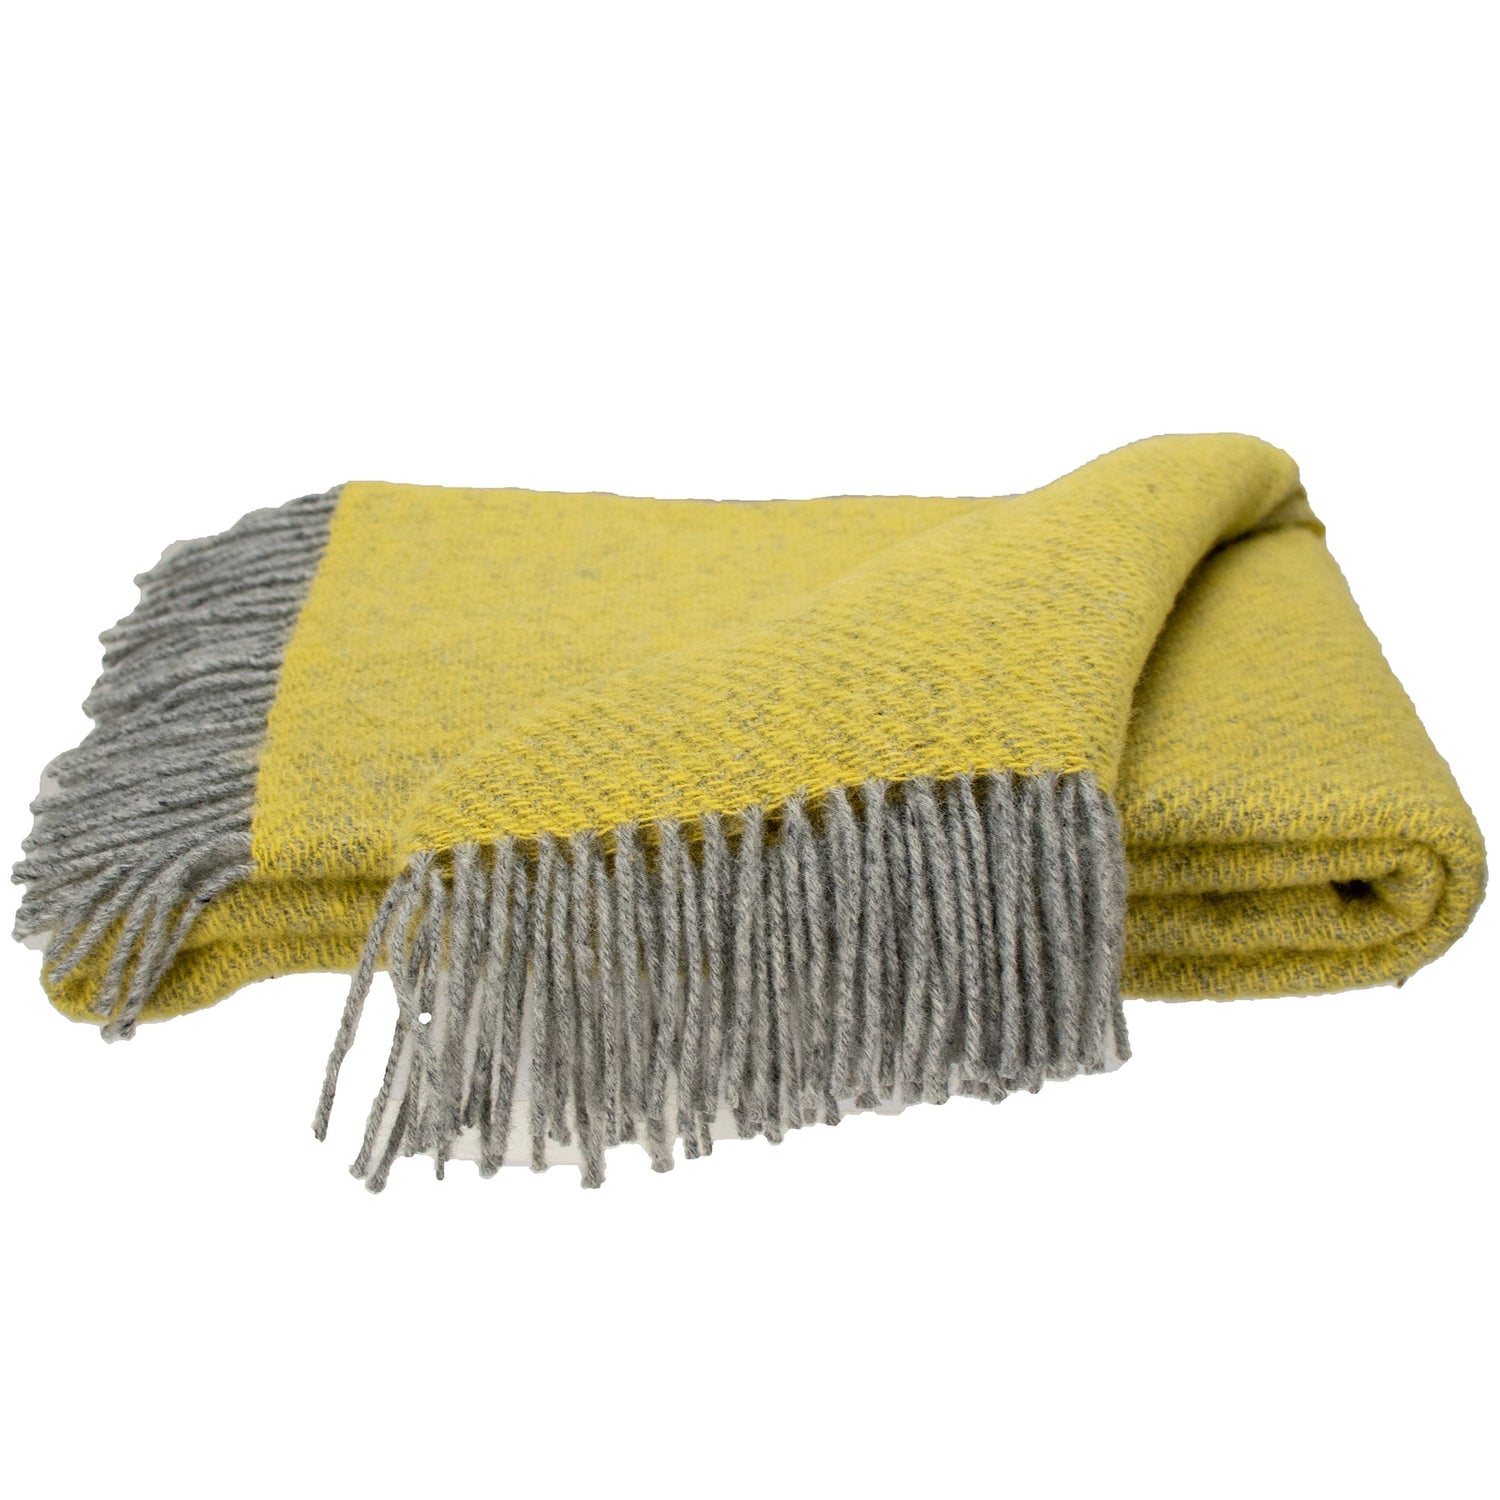 Southampton Home Wool Twill Throw Blanket (Yellow Daisy)-Throws and Blankets-810032752460-SHWoolTwillLemon-Prince of Scots